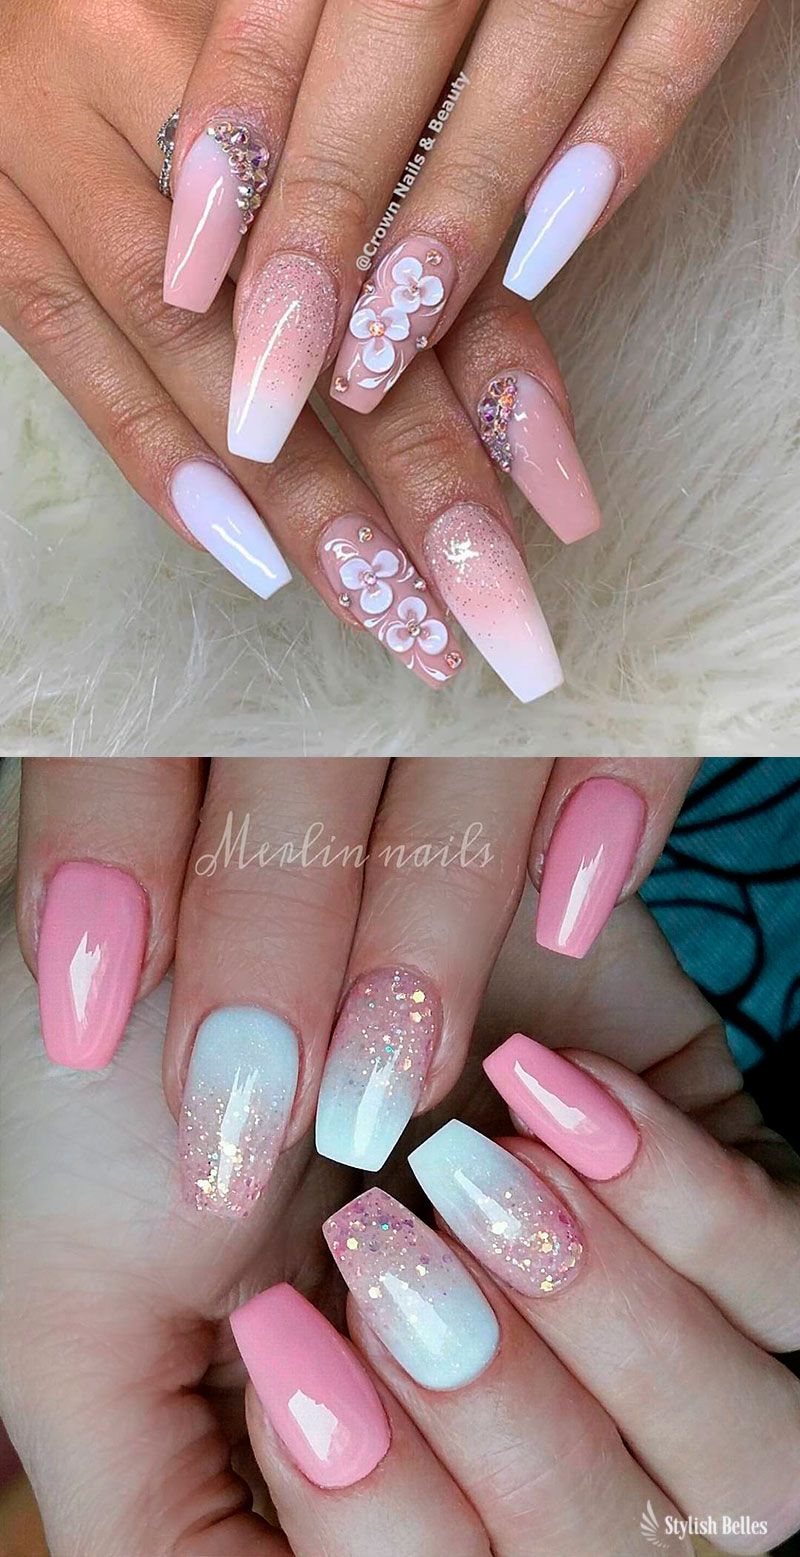 Gorgeous Pink And White Ombre Nails With Glitter Ideas Coffinnails Pinkandwhitenails Glitternails Coffin Nails Designs Ombre Nails Pink Nails